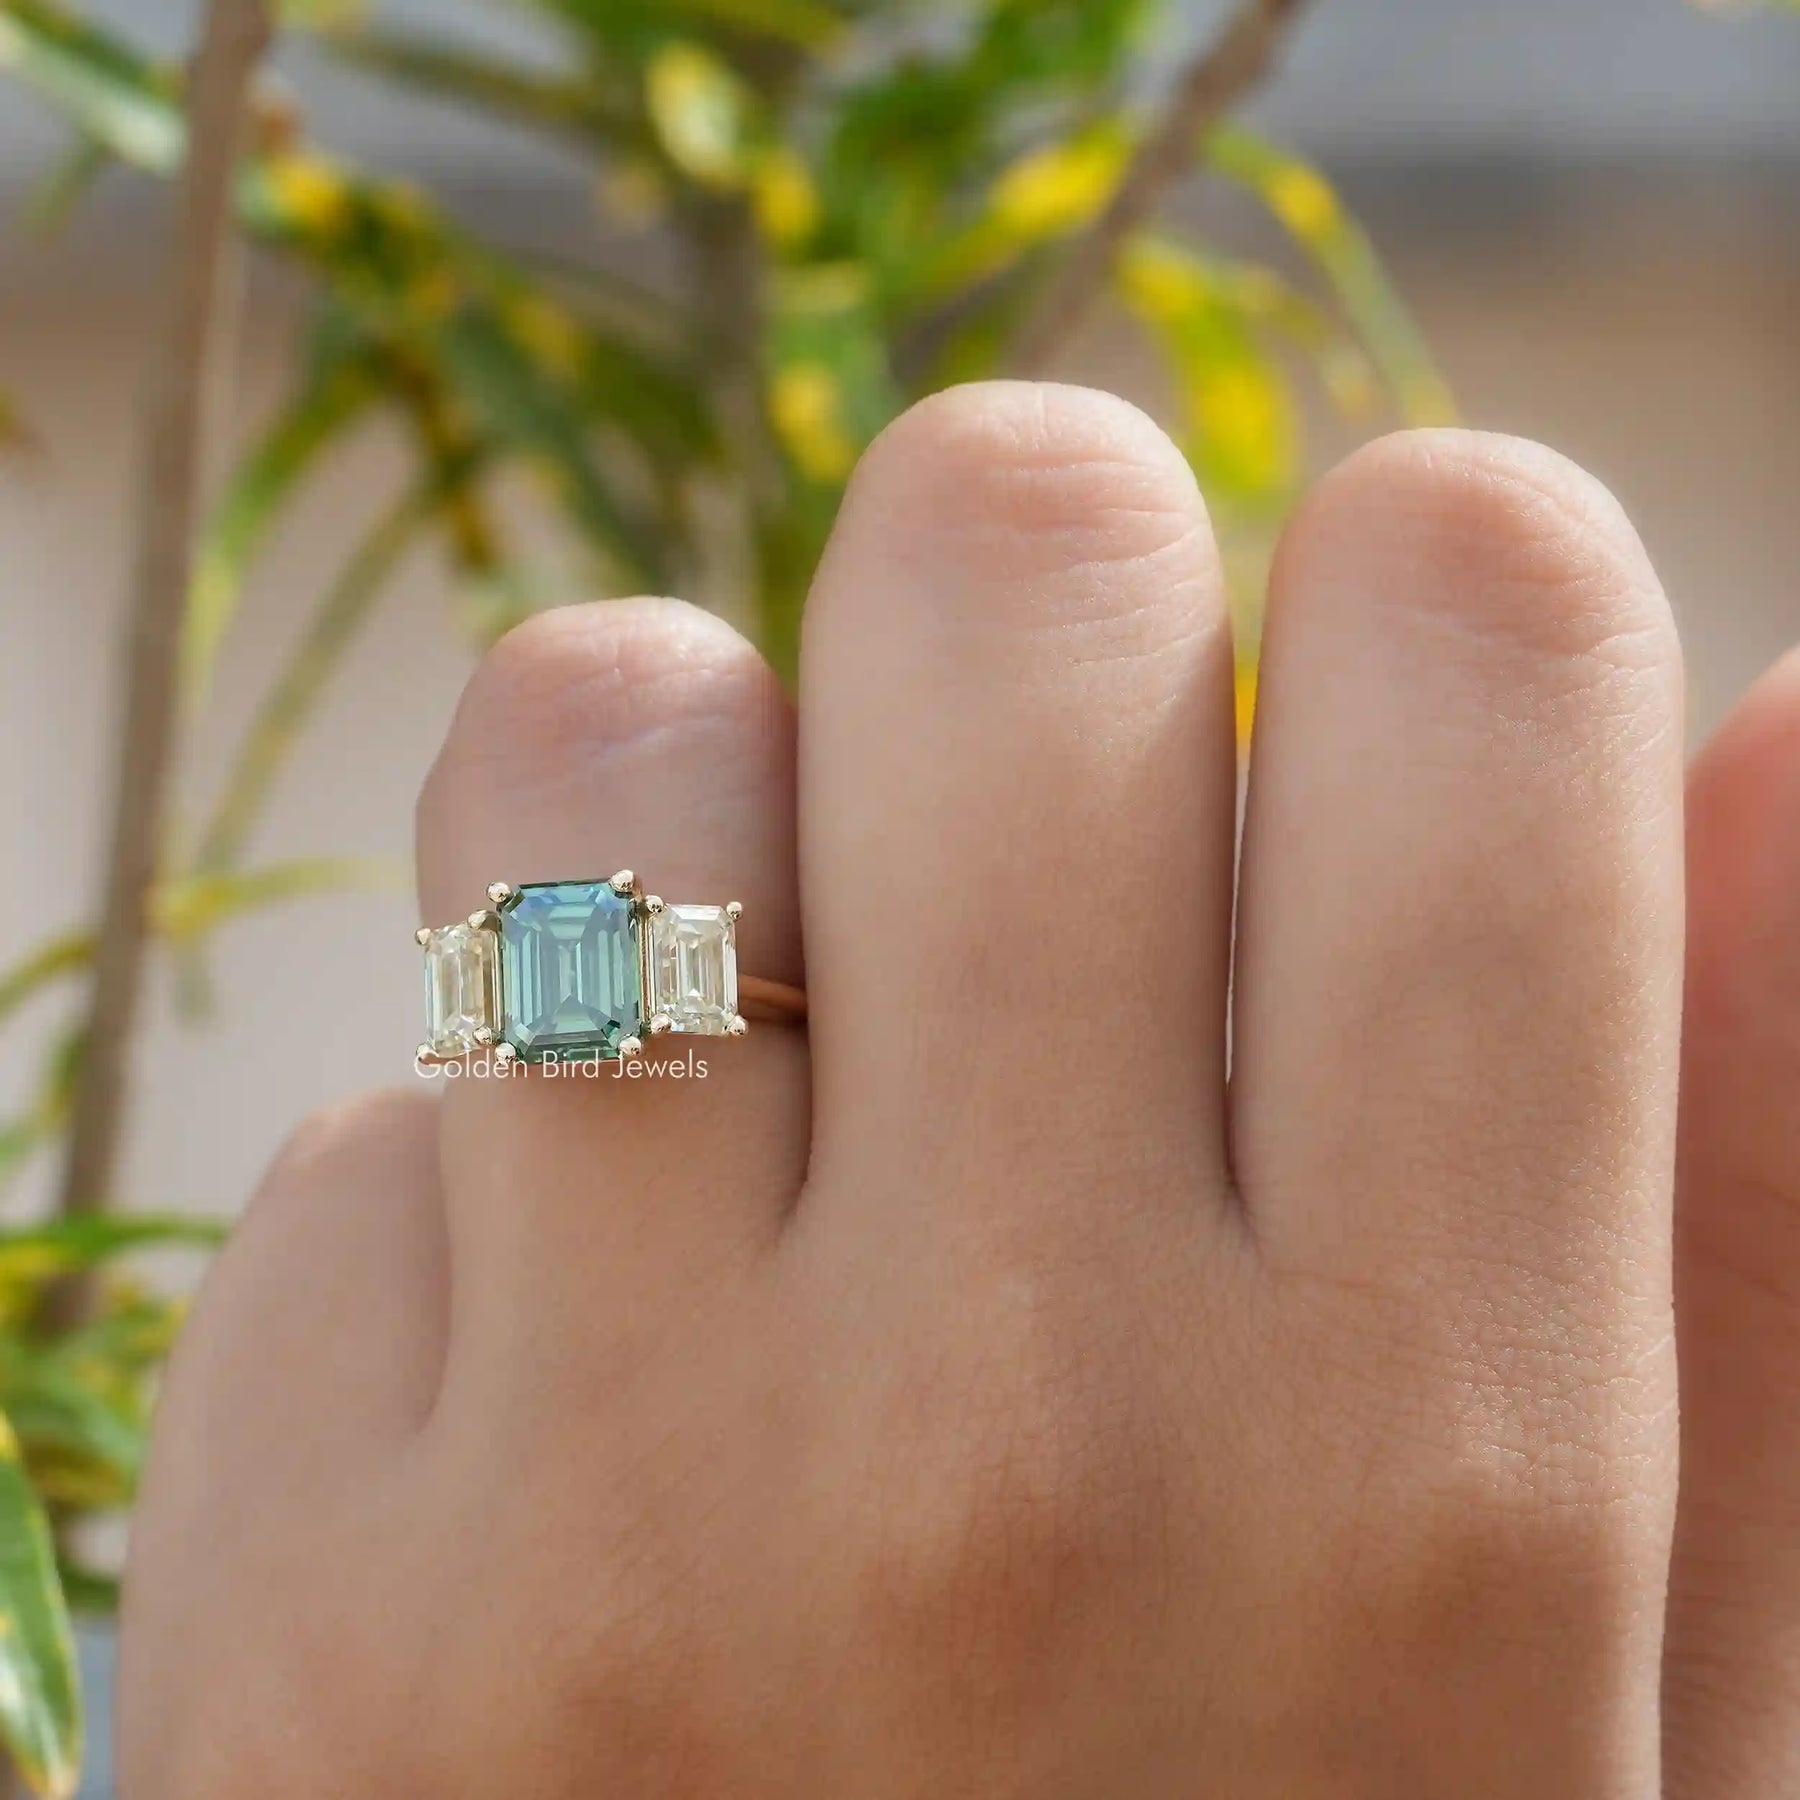 [In finger front view of moissanite emerald cut 3 stone ring]-[Golden Bird Jewels]